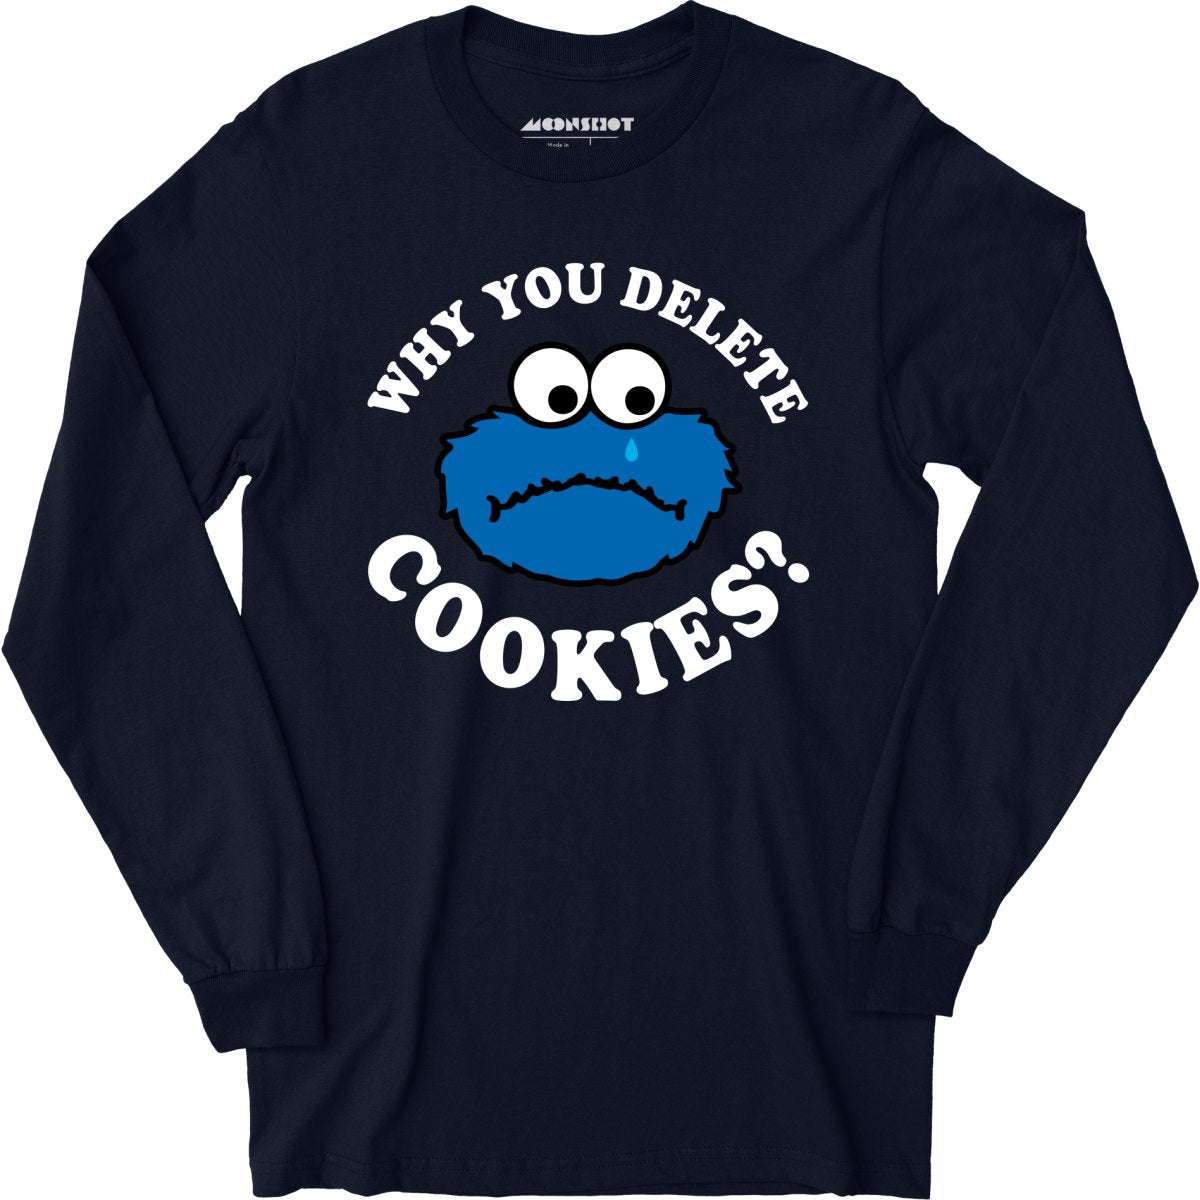 Why You Delete Cookies? - Long Sleeve T-Shirt